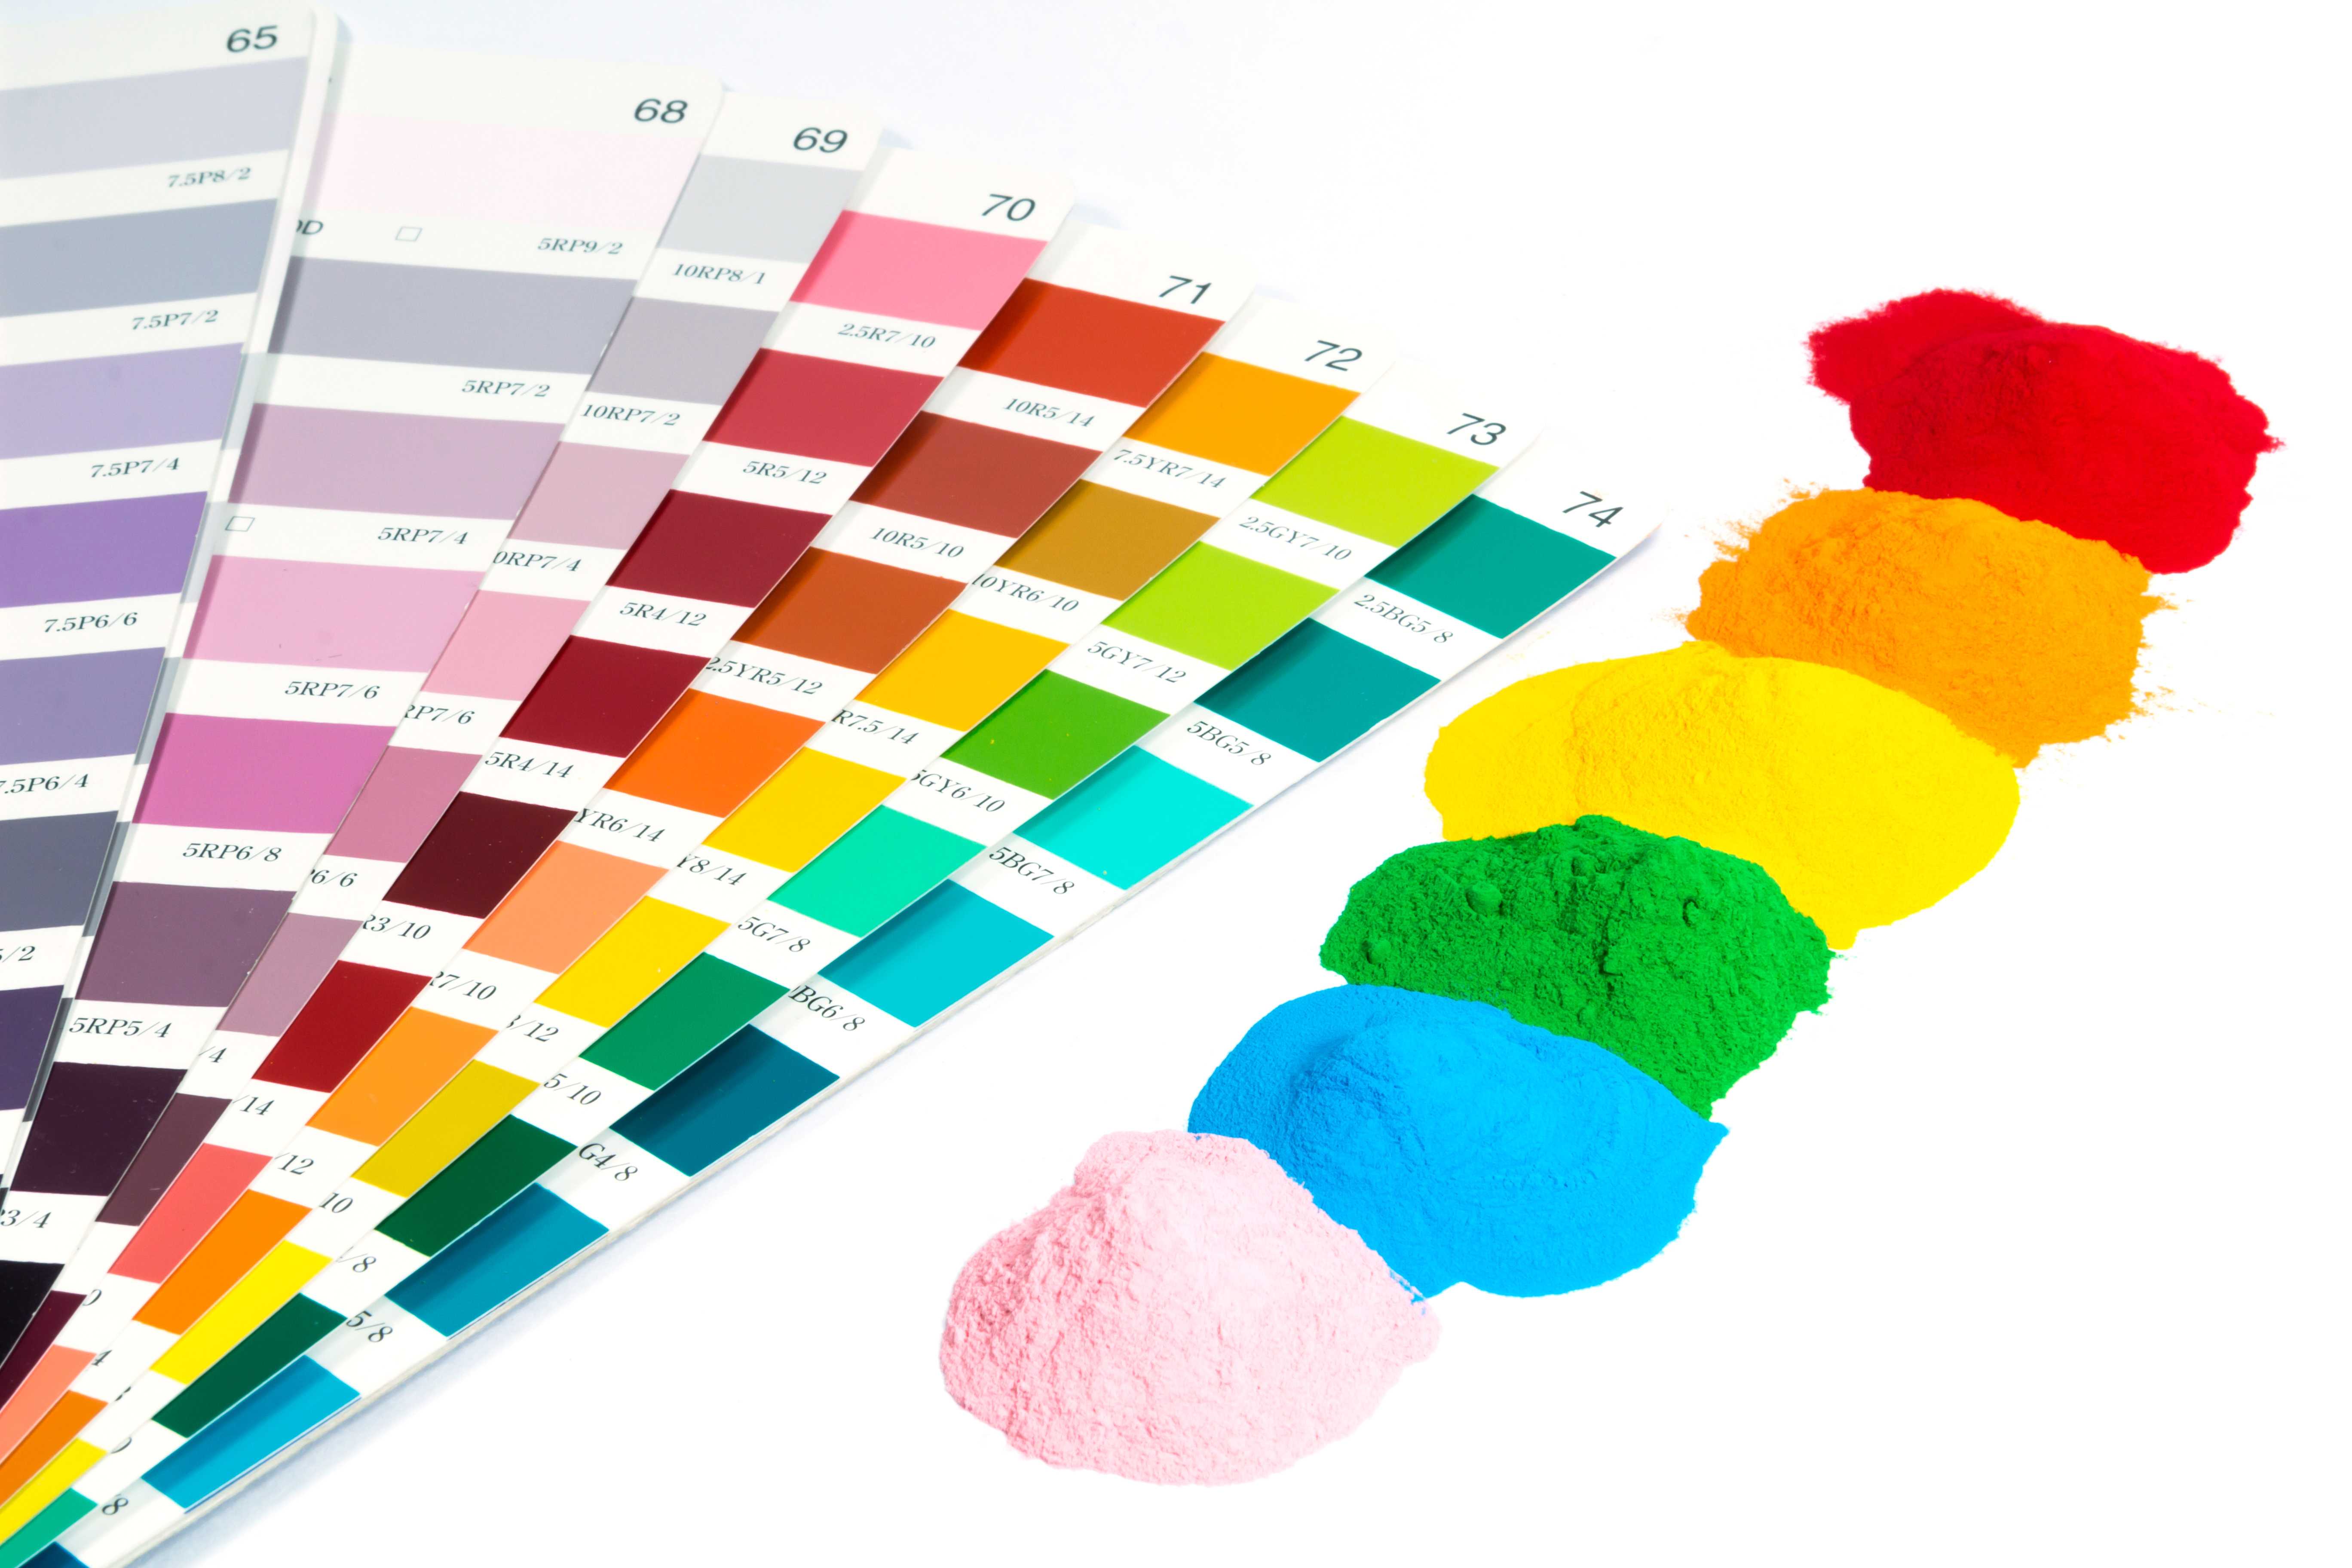 stock-photo-colorful-of-powder-coating-and-color-chart-199248086